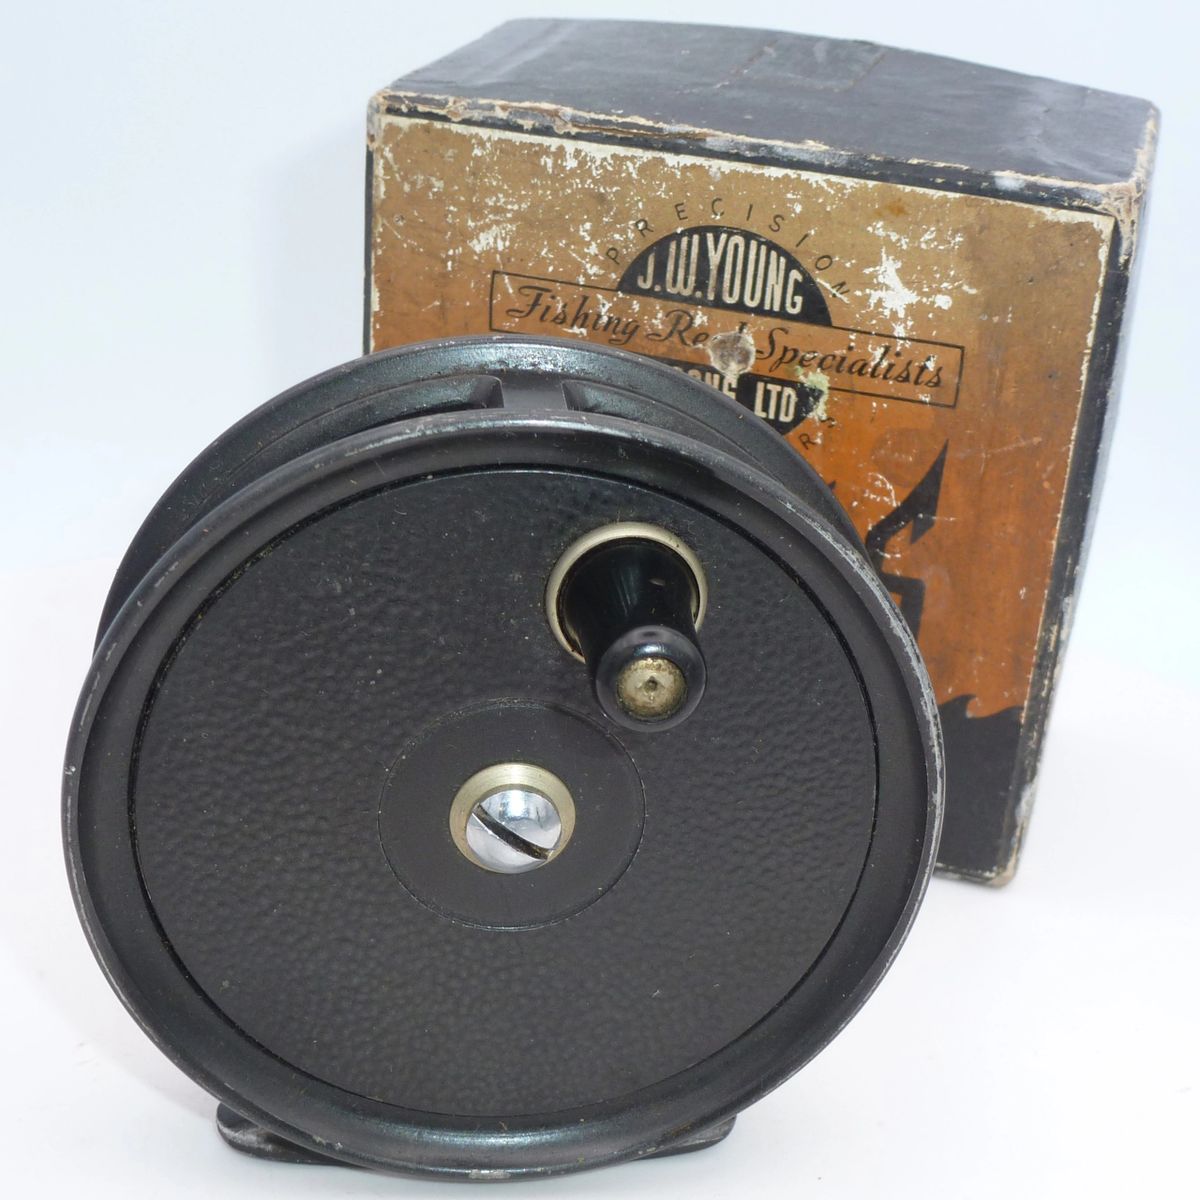 J W Young Condex Trout Reel in Box